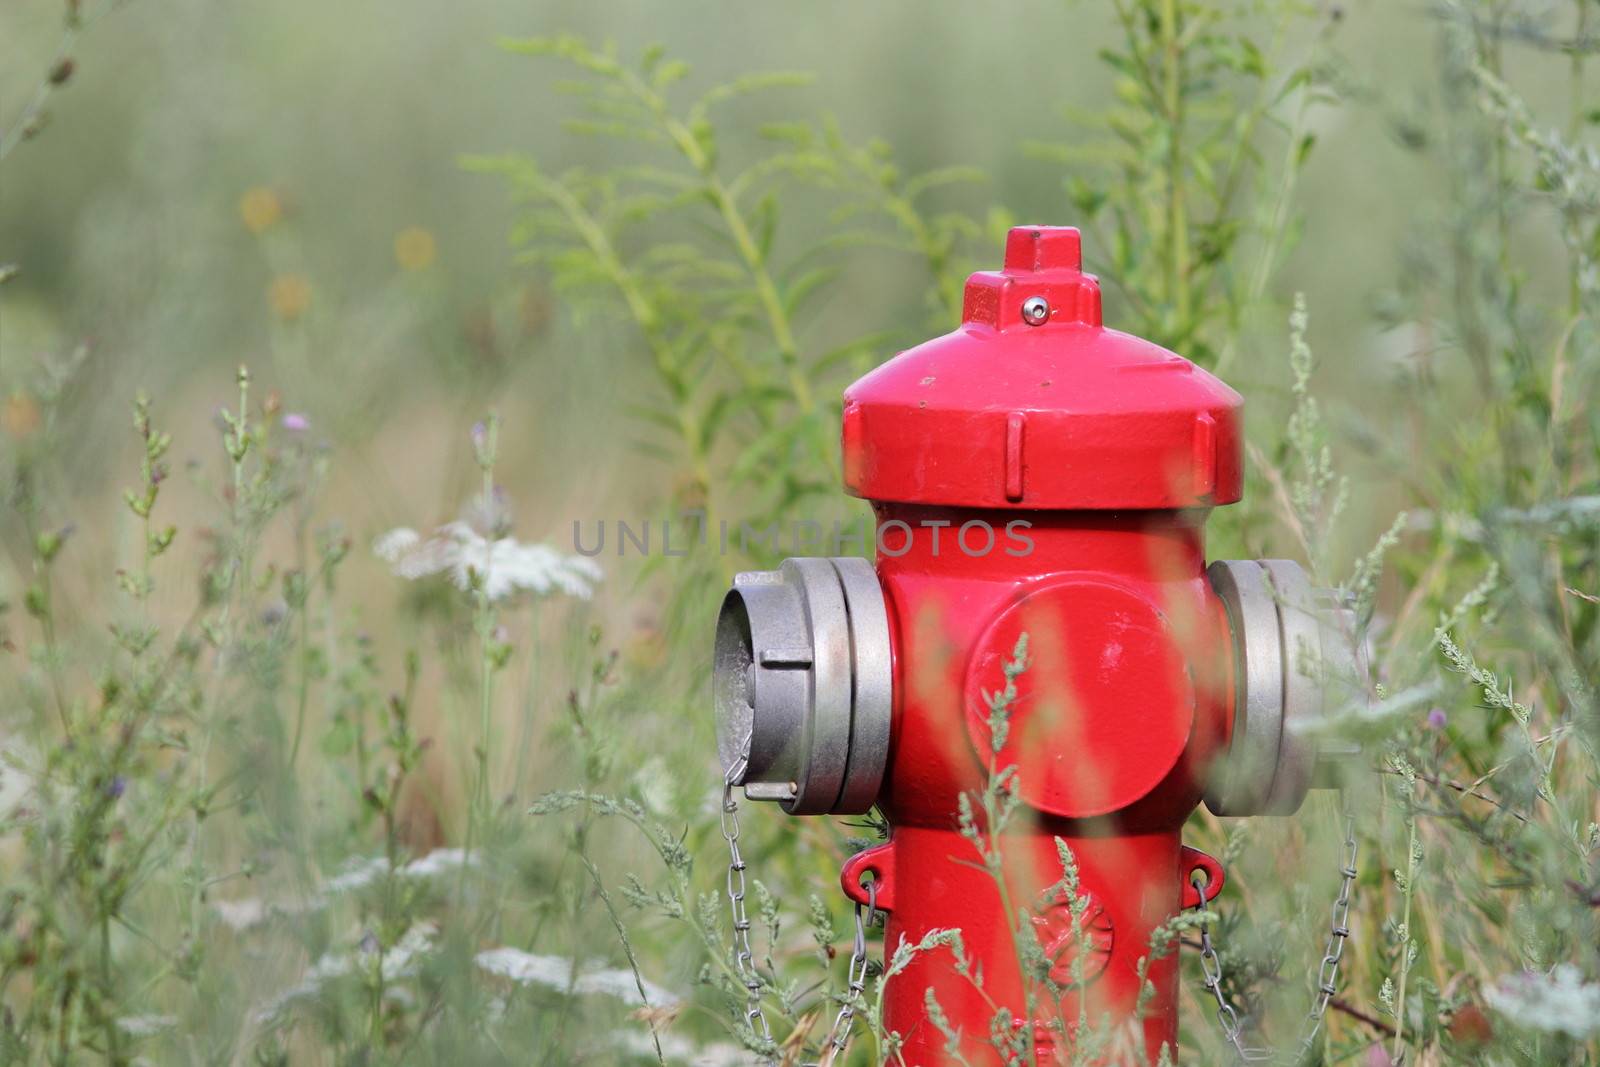 red hydrant being eaten by the wild plants growing nearby